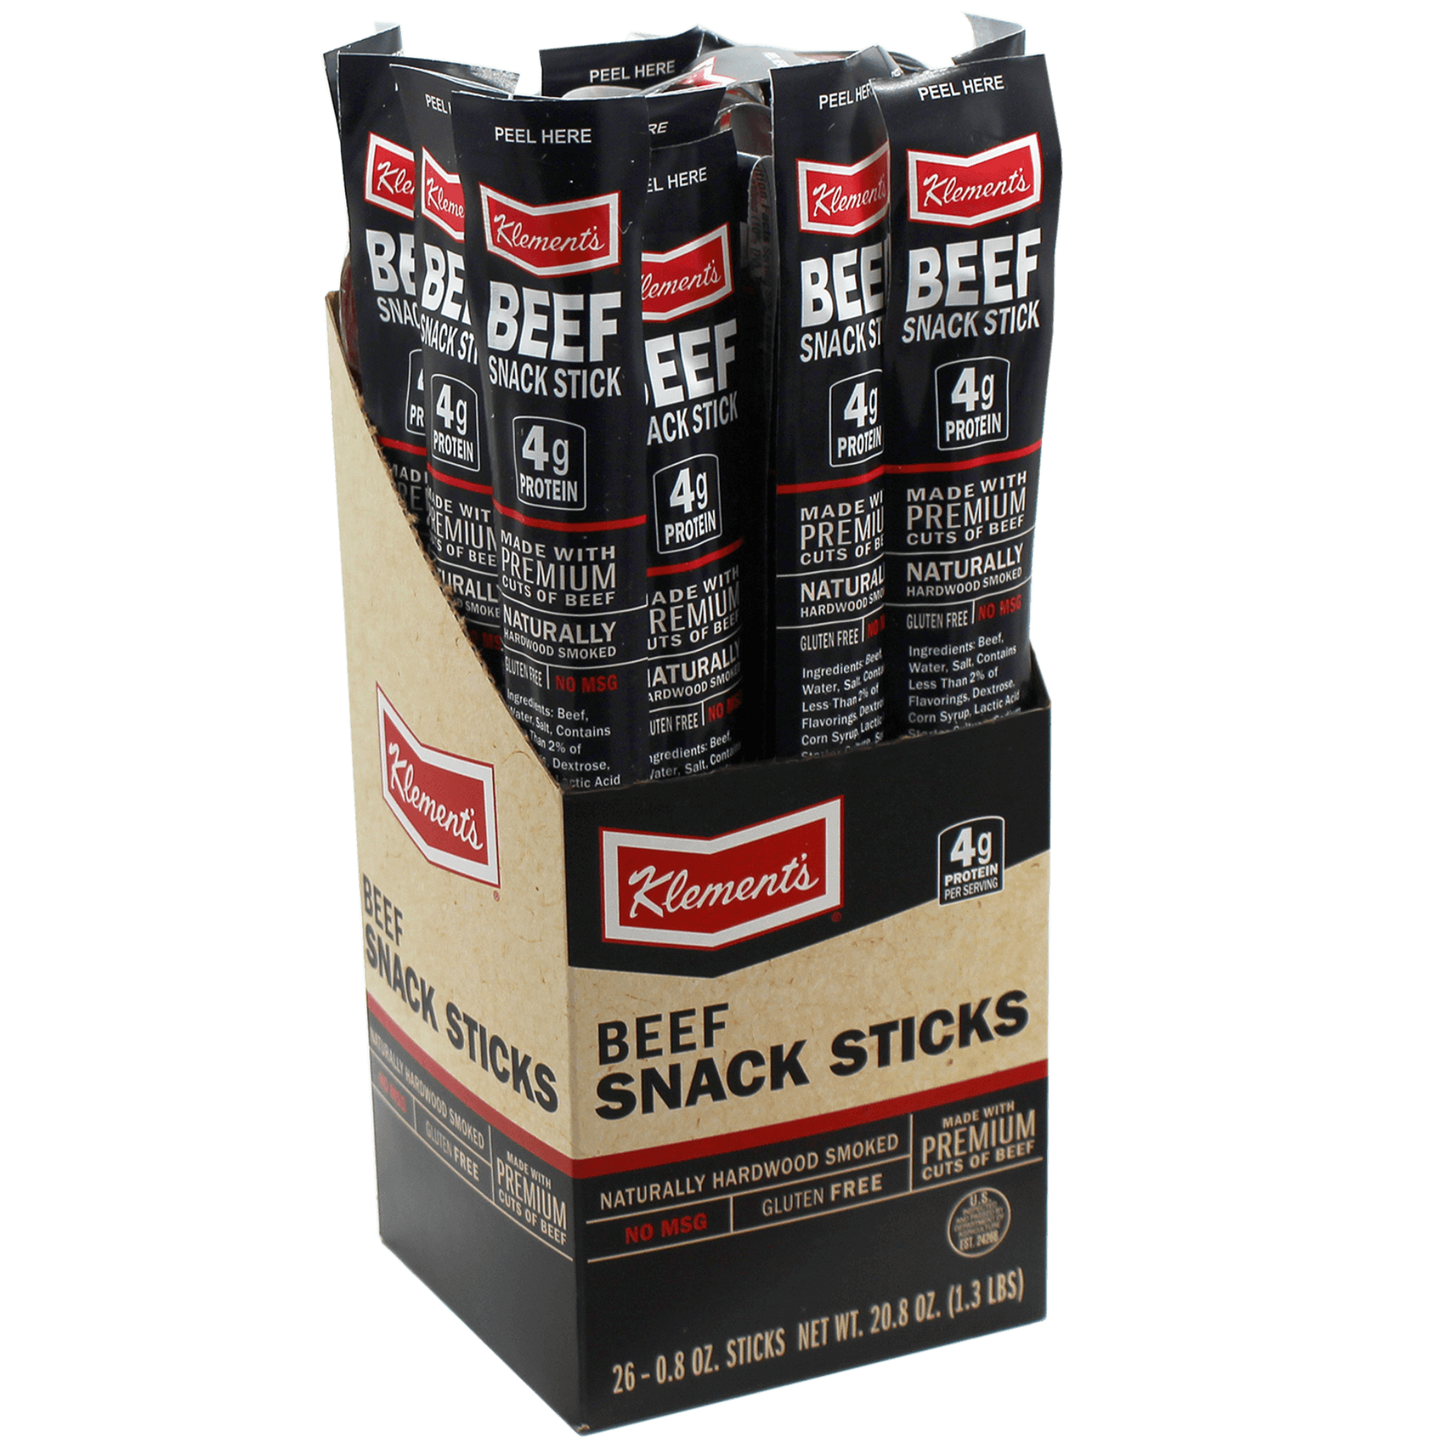 .8 oz. Beef Meat Sticks - 100 Count Case